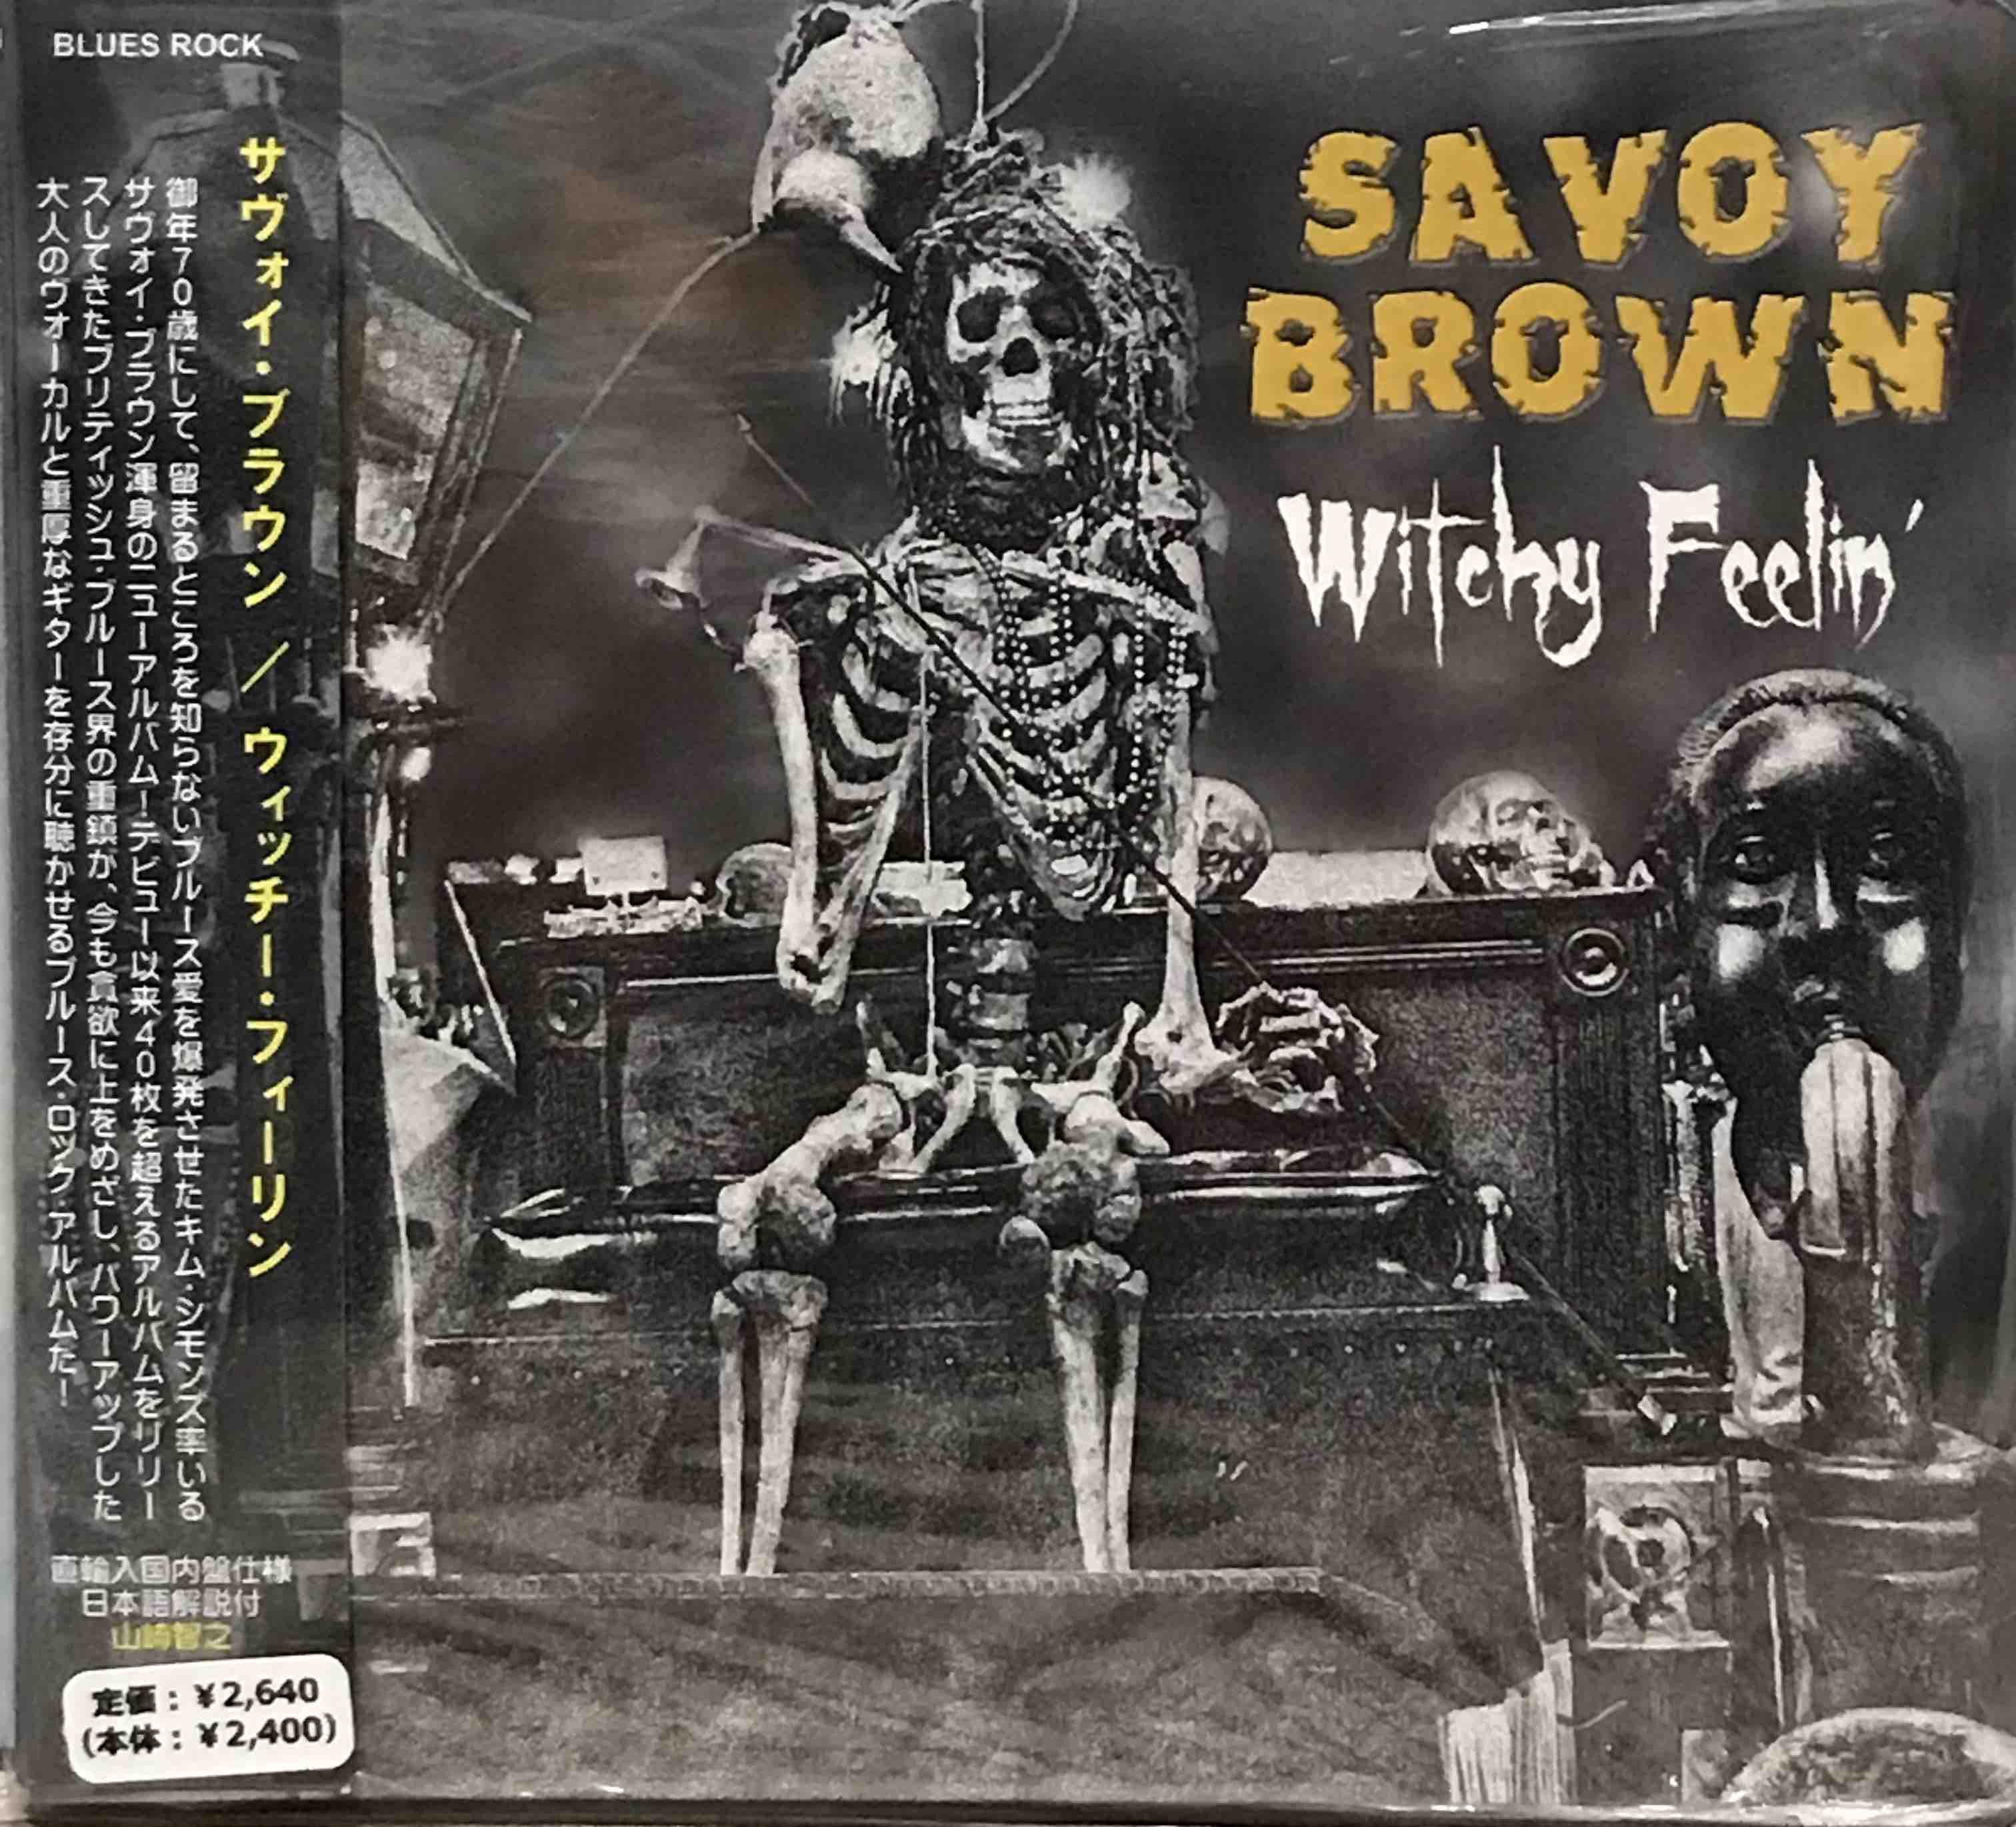 Savoy Brown ‎– Witchy Feelin'